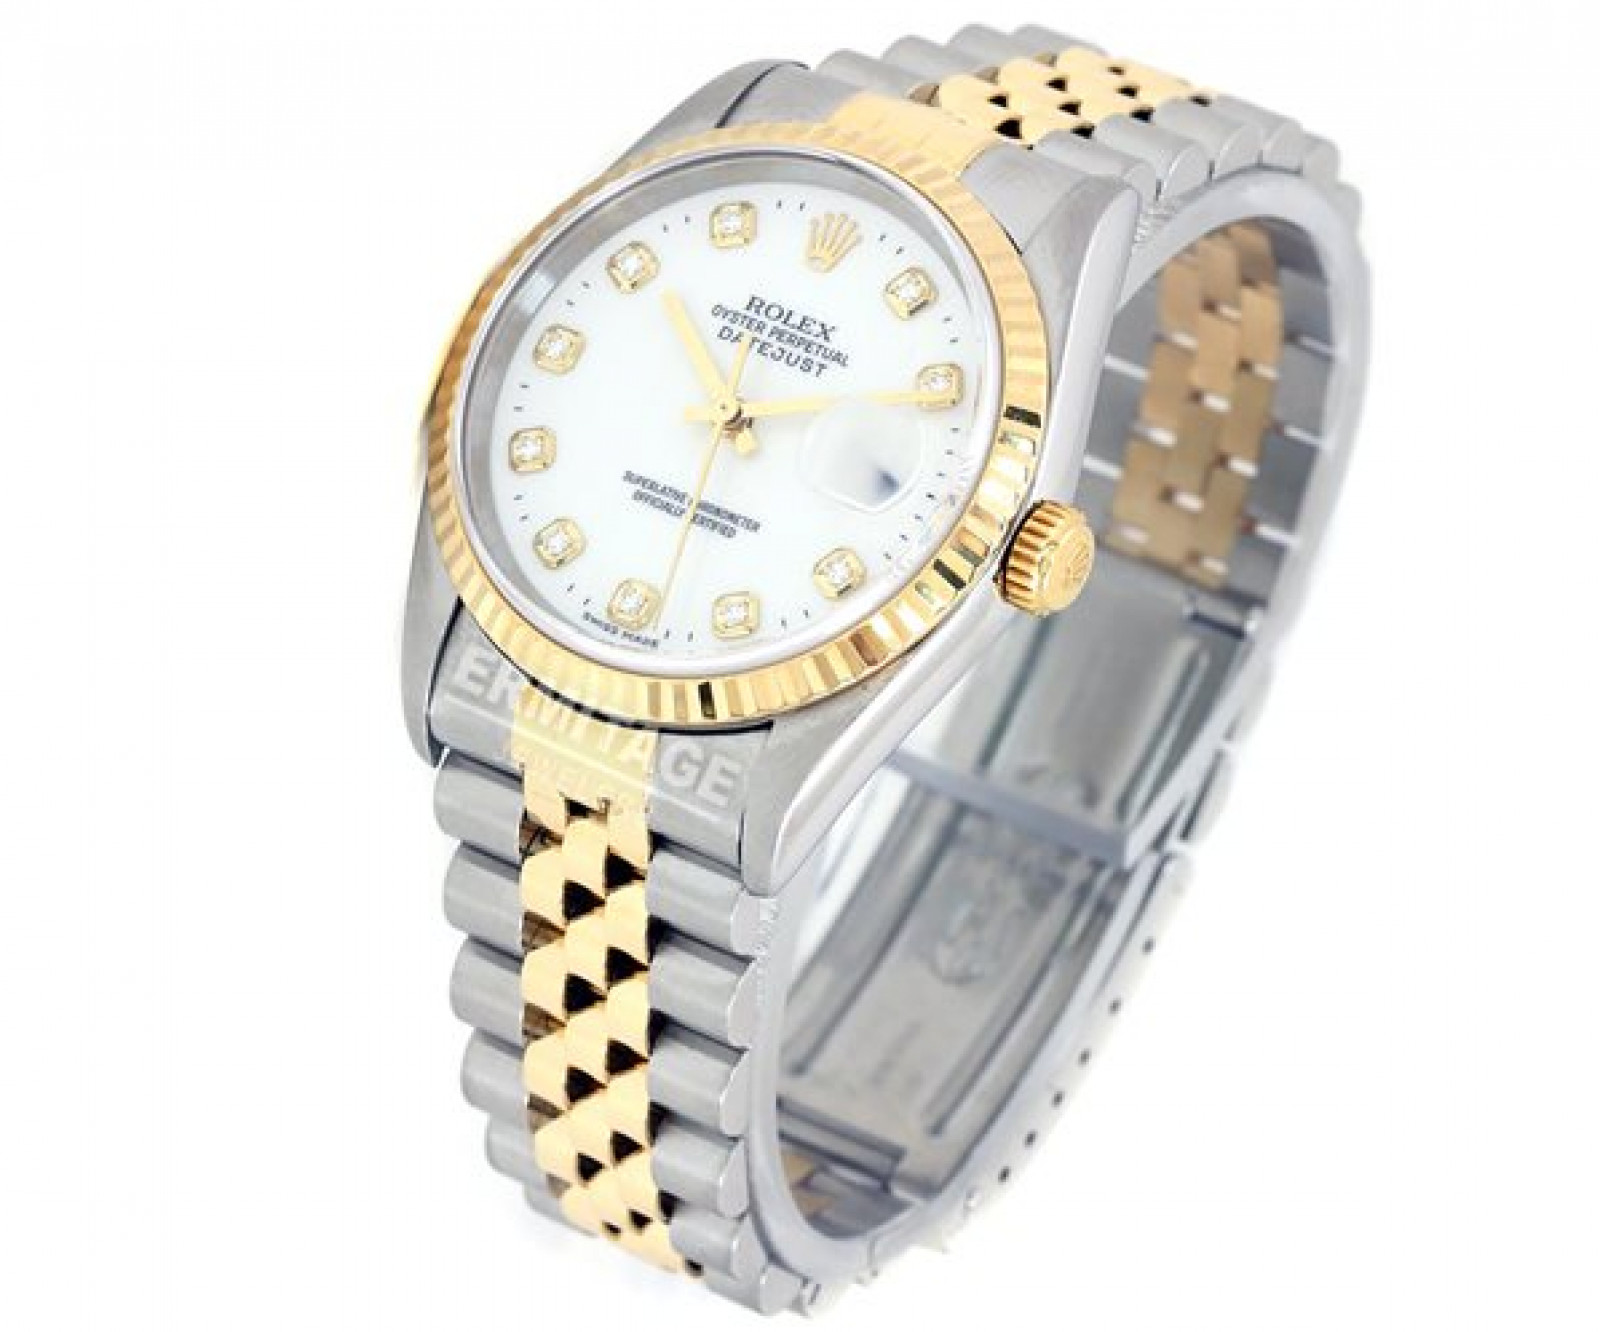 Pre-Owned Two Tone Rolex Datejust 16233 with Diamonds